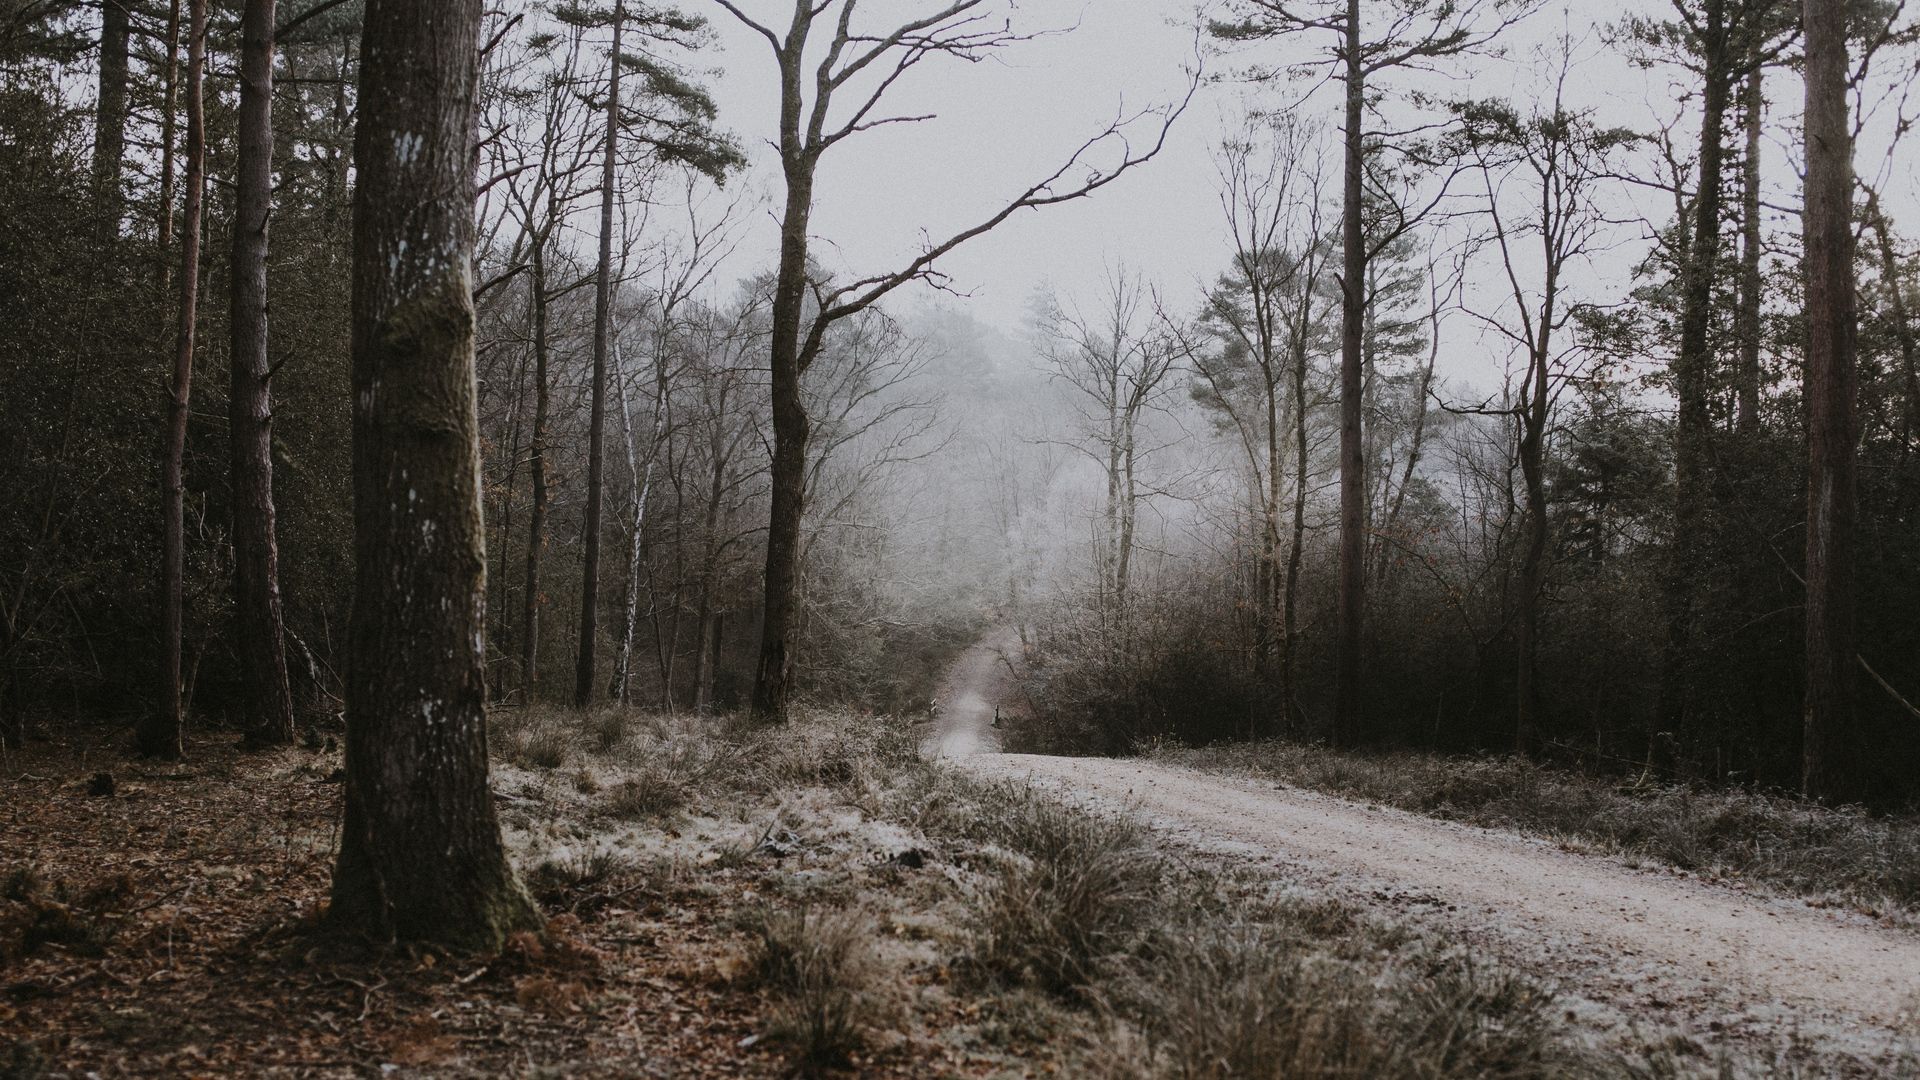 Download wallpaper 1920x1080 forest, path, fog, trees, frost